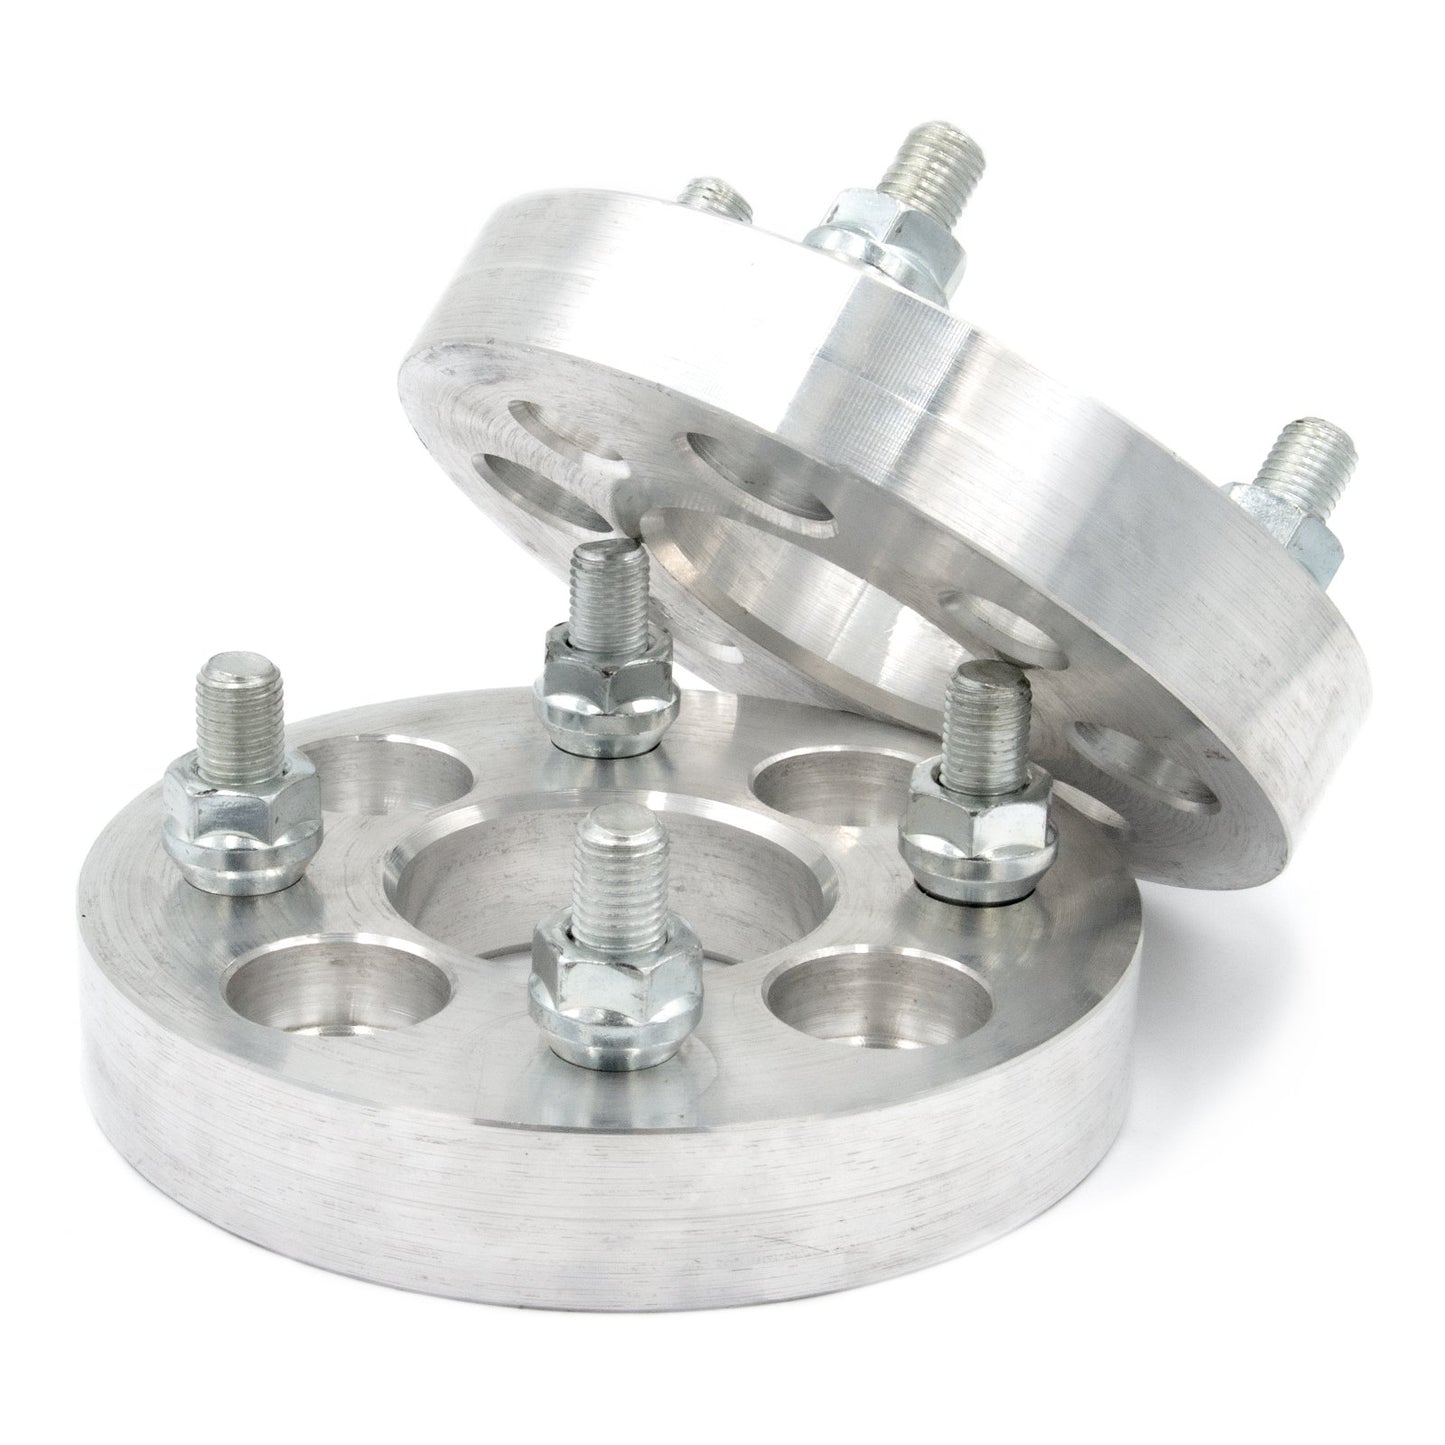 4x4" to 4x115 Wheel Spacer/Adapter - Thickness: 3/4"- 4"